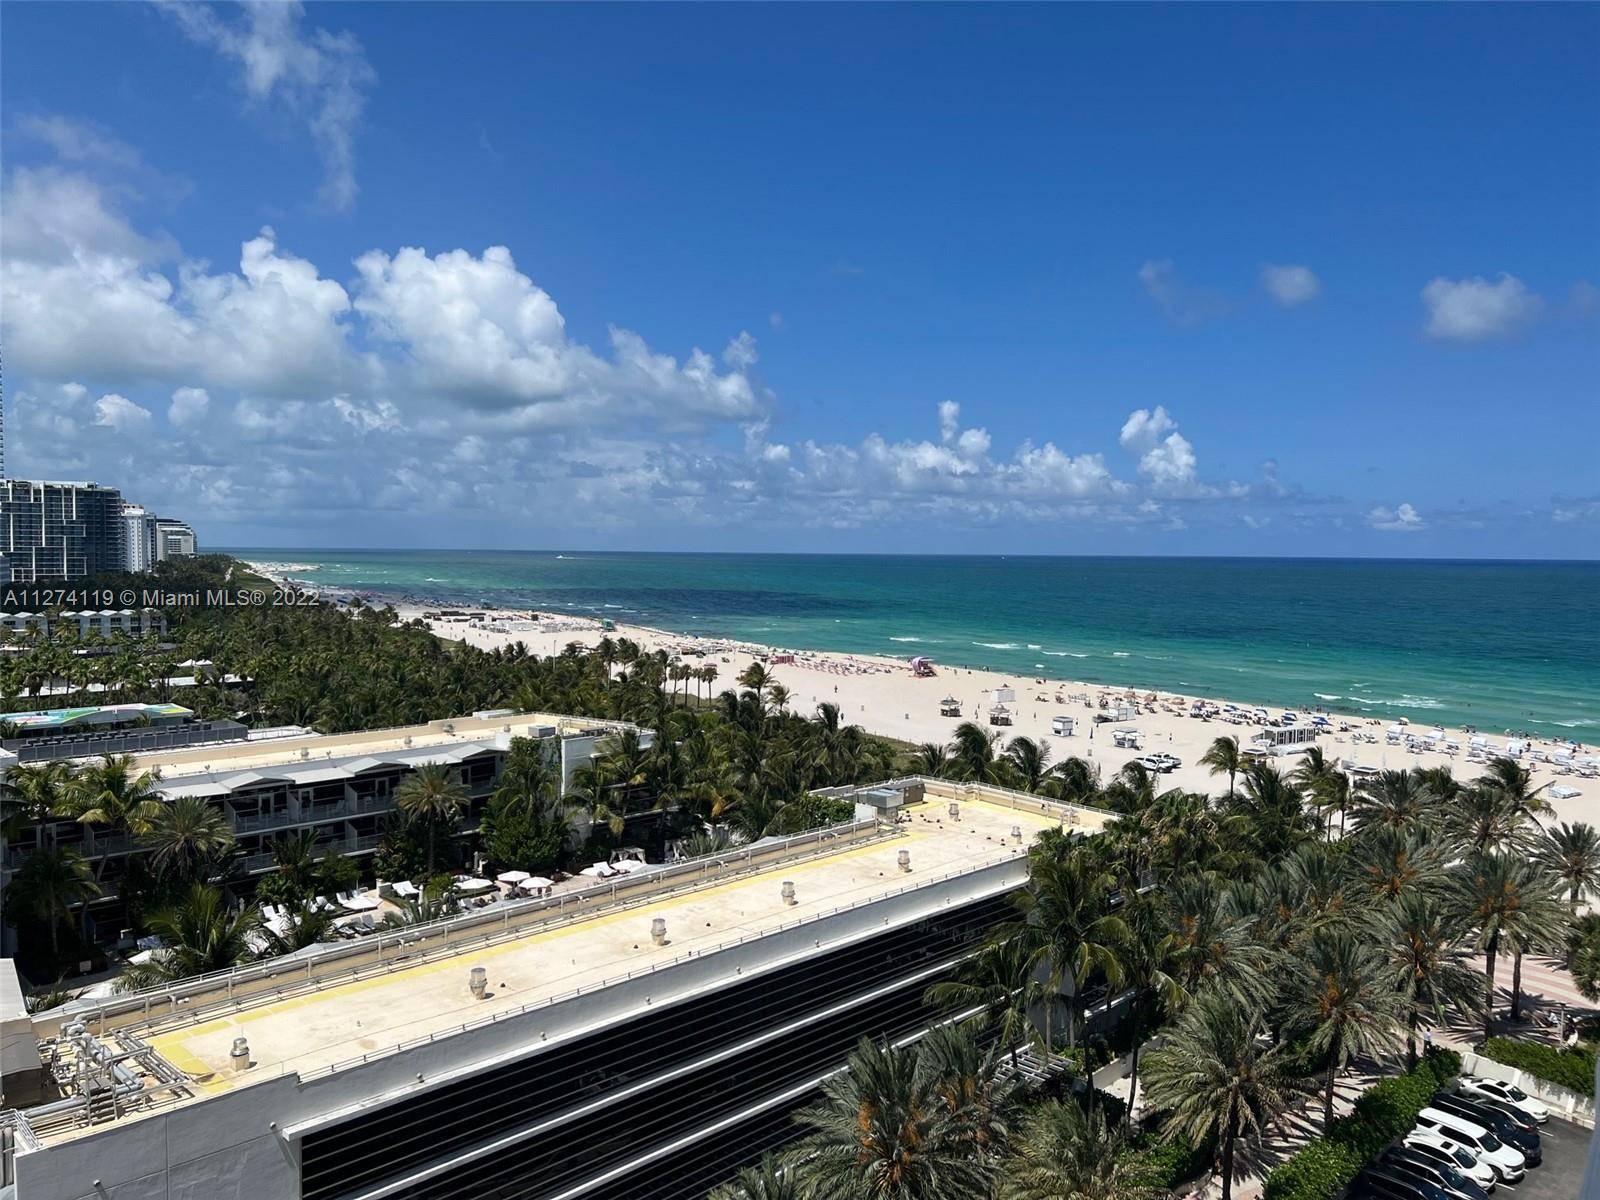 Fully Furnished, direct beach access, sweeping North East West views of ocean, palm trees and white sands from private balcony.